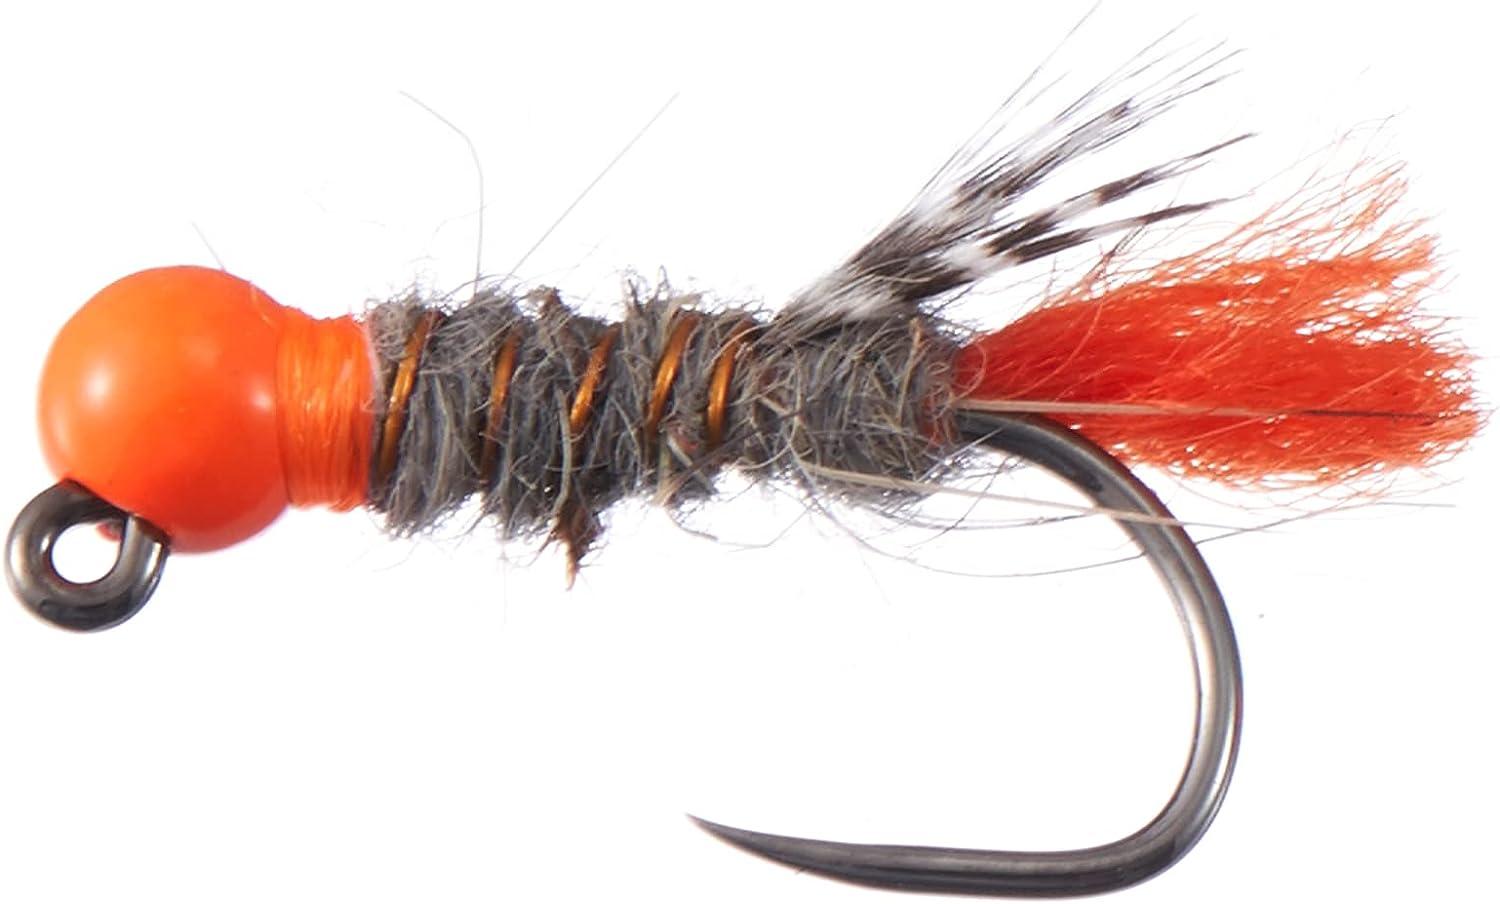 BASSDASH Fly Fishing Flies Kit Fly Assortment Trout Fishing with